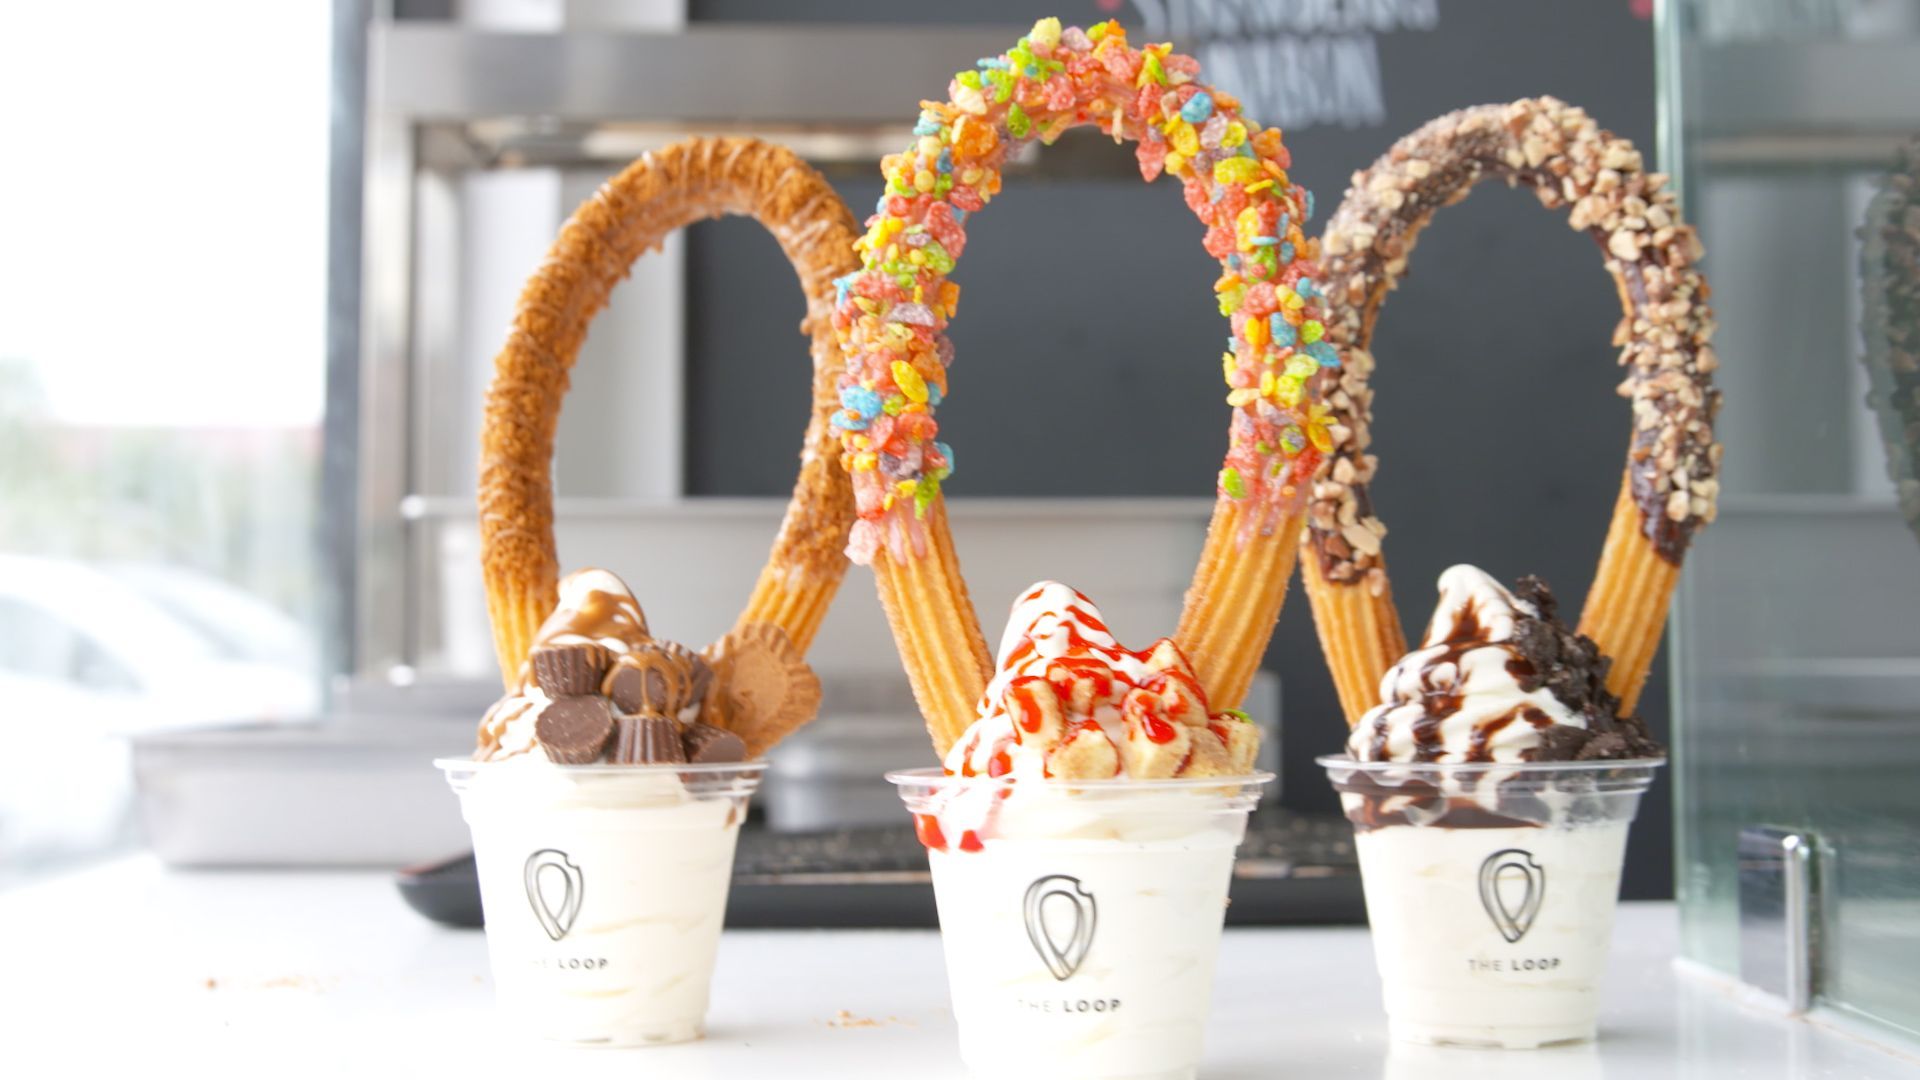 Most Outrageous Sundaes In America The Top Sundaes Across